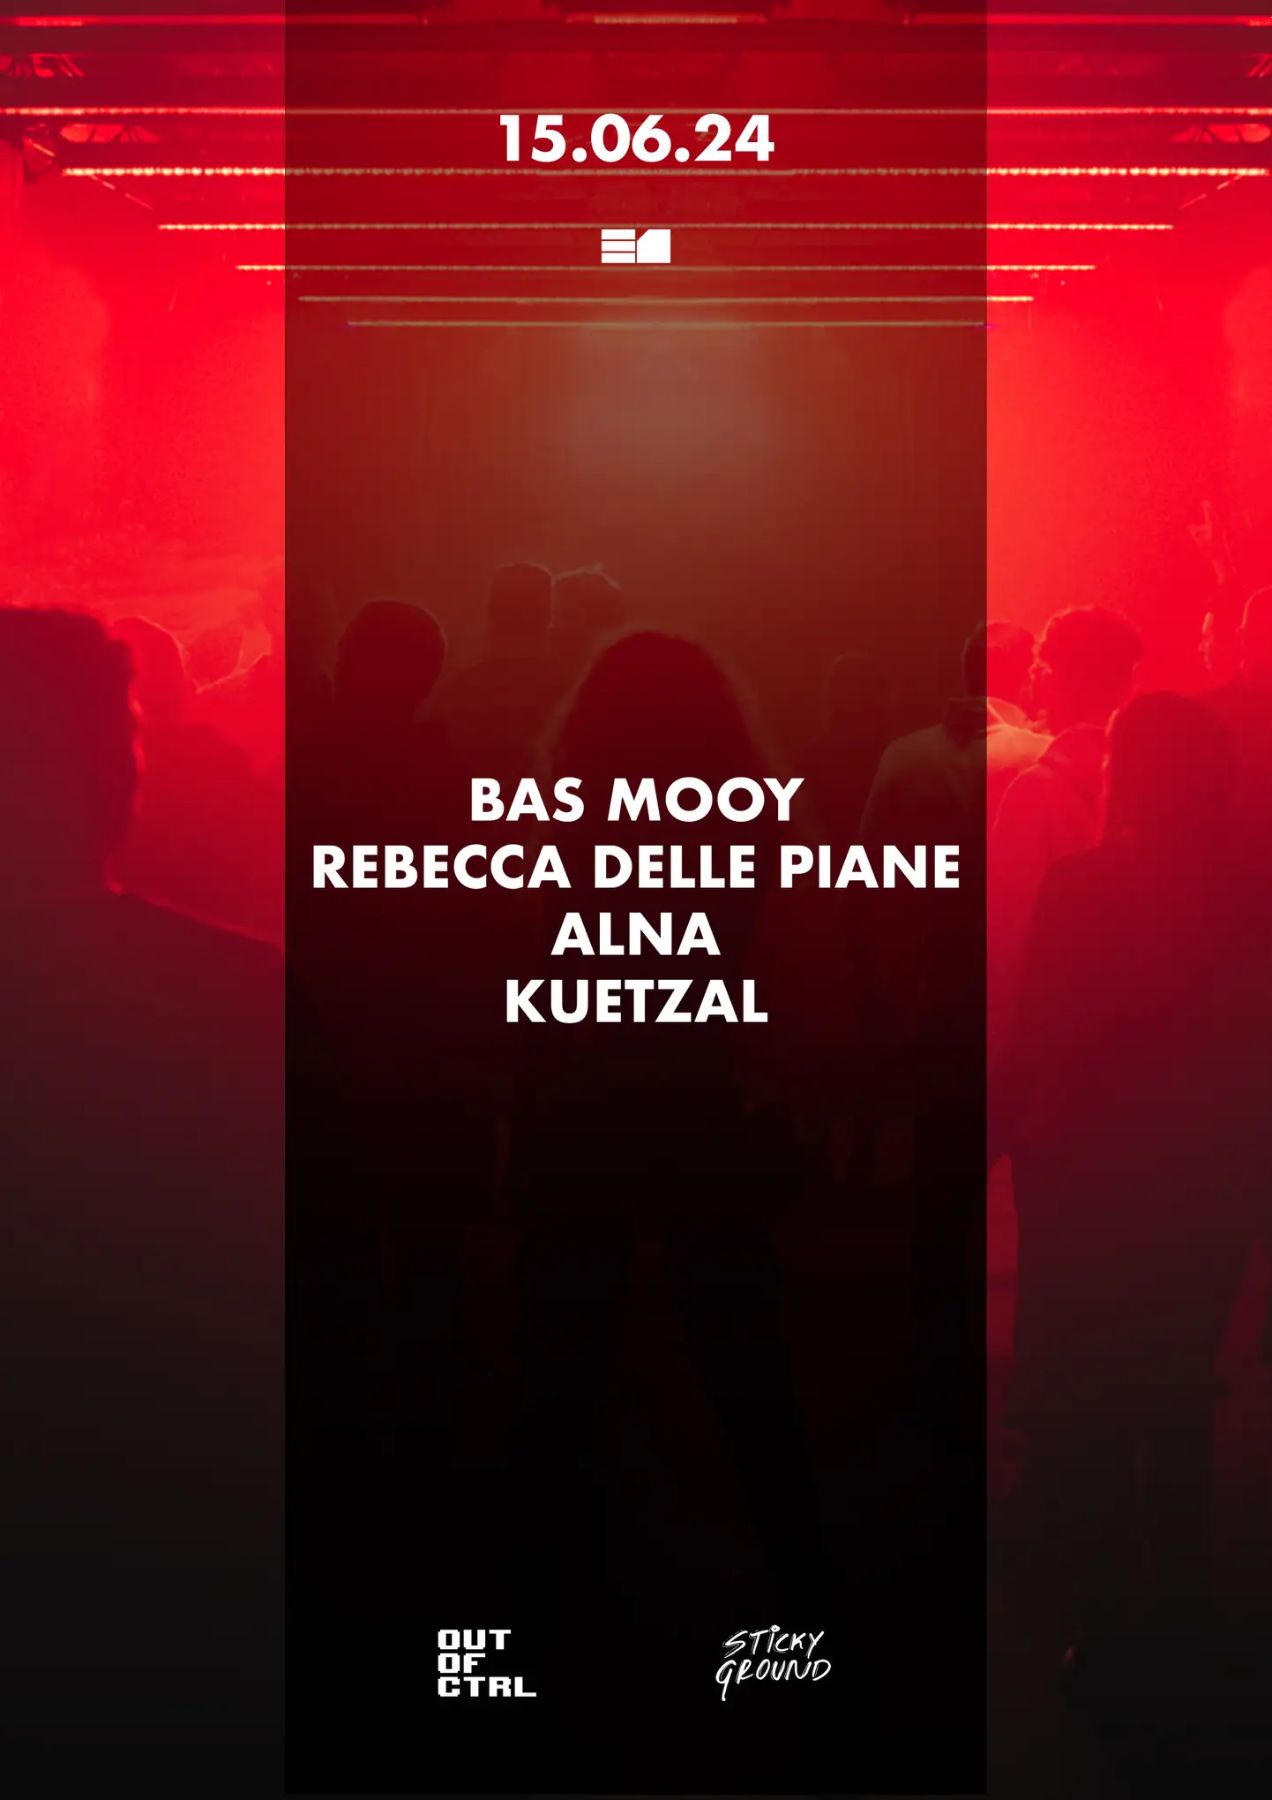 OUT OF CTRL x STICKY GROUND with Bas Mooy, Rebecca Delle Piane, ALNA, Küetzal E1